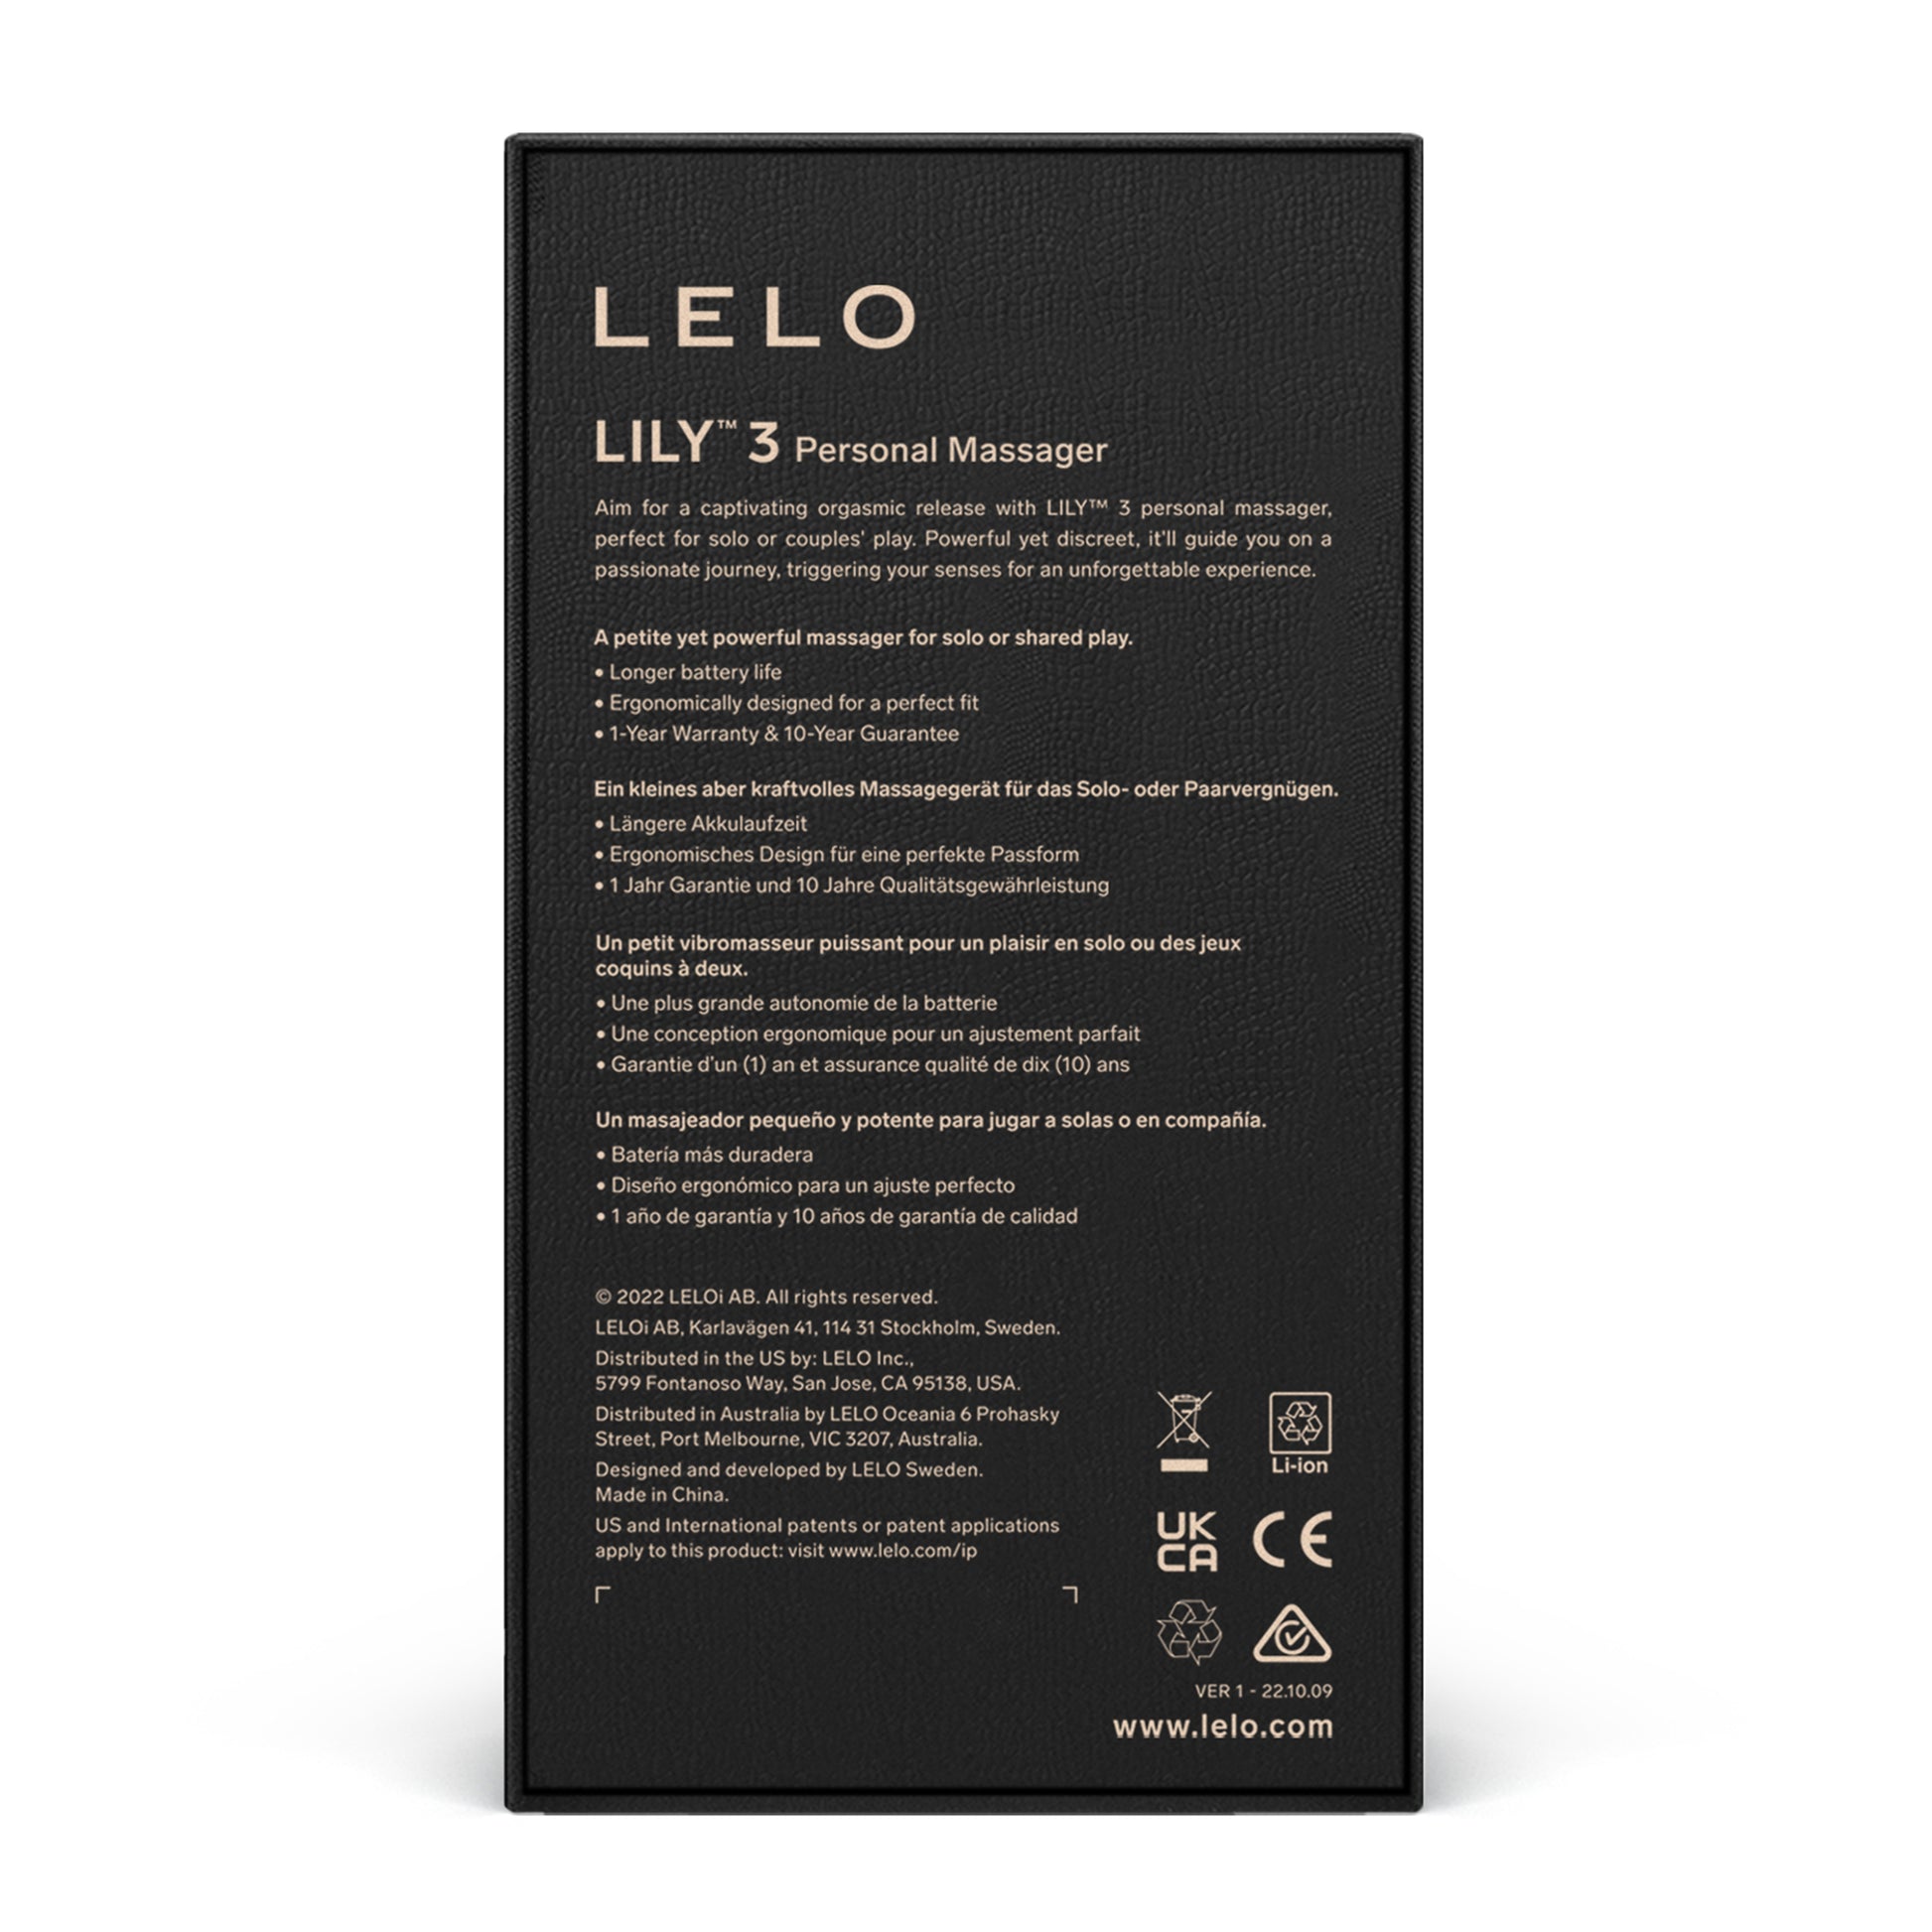 Lelo - Lily 3 Personal Massager Polar Green - 1